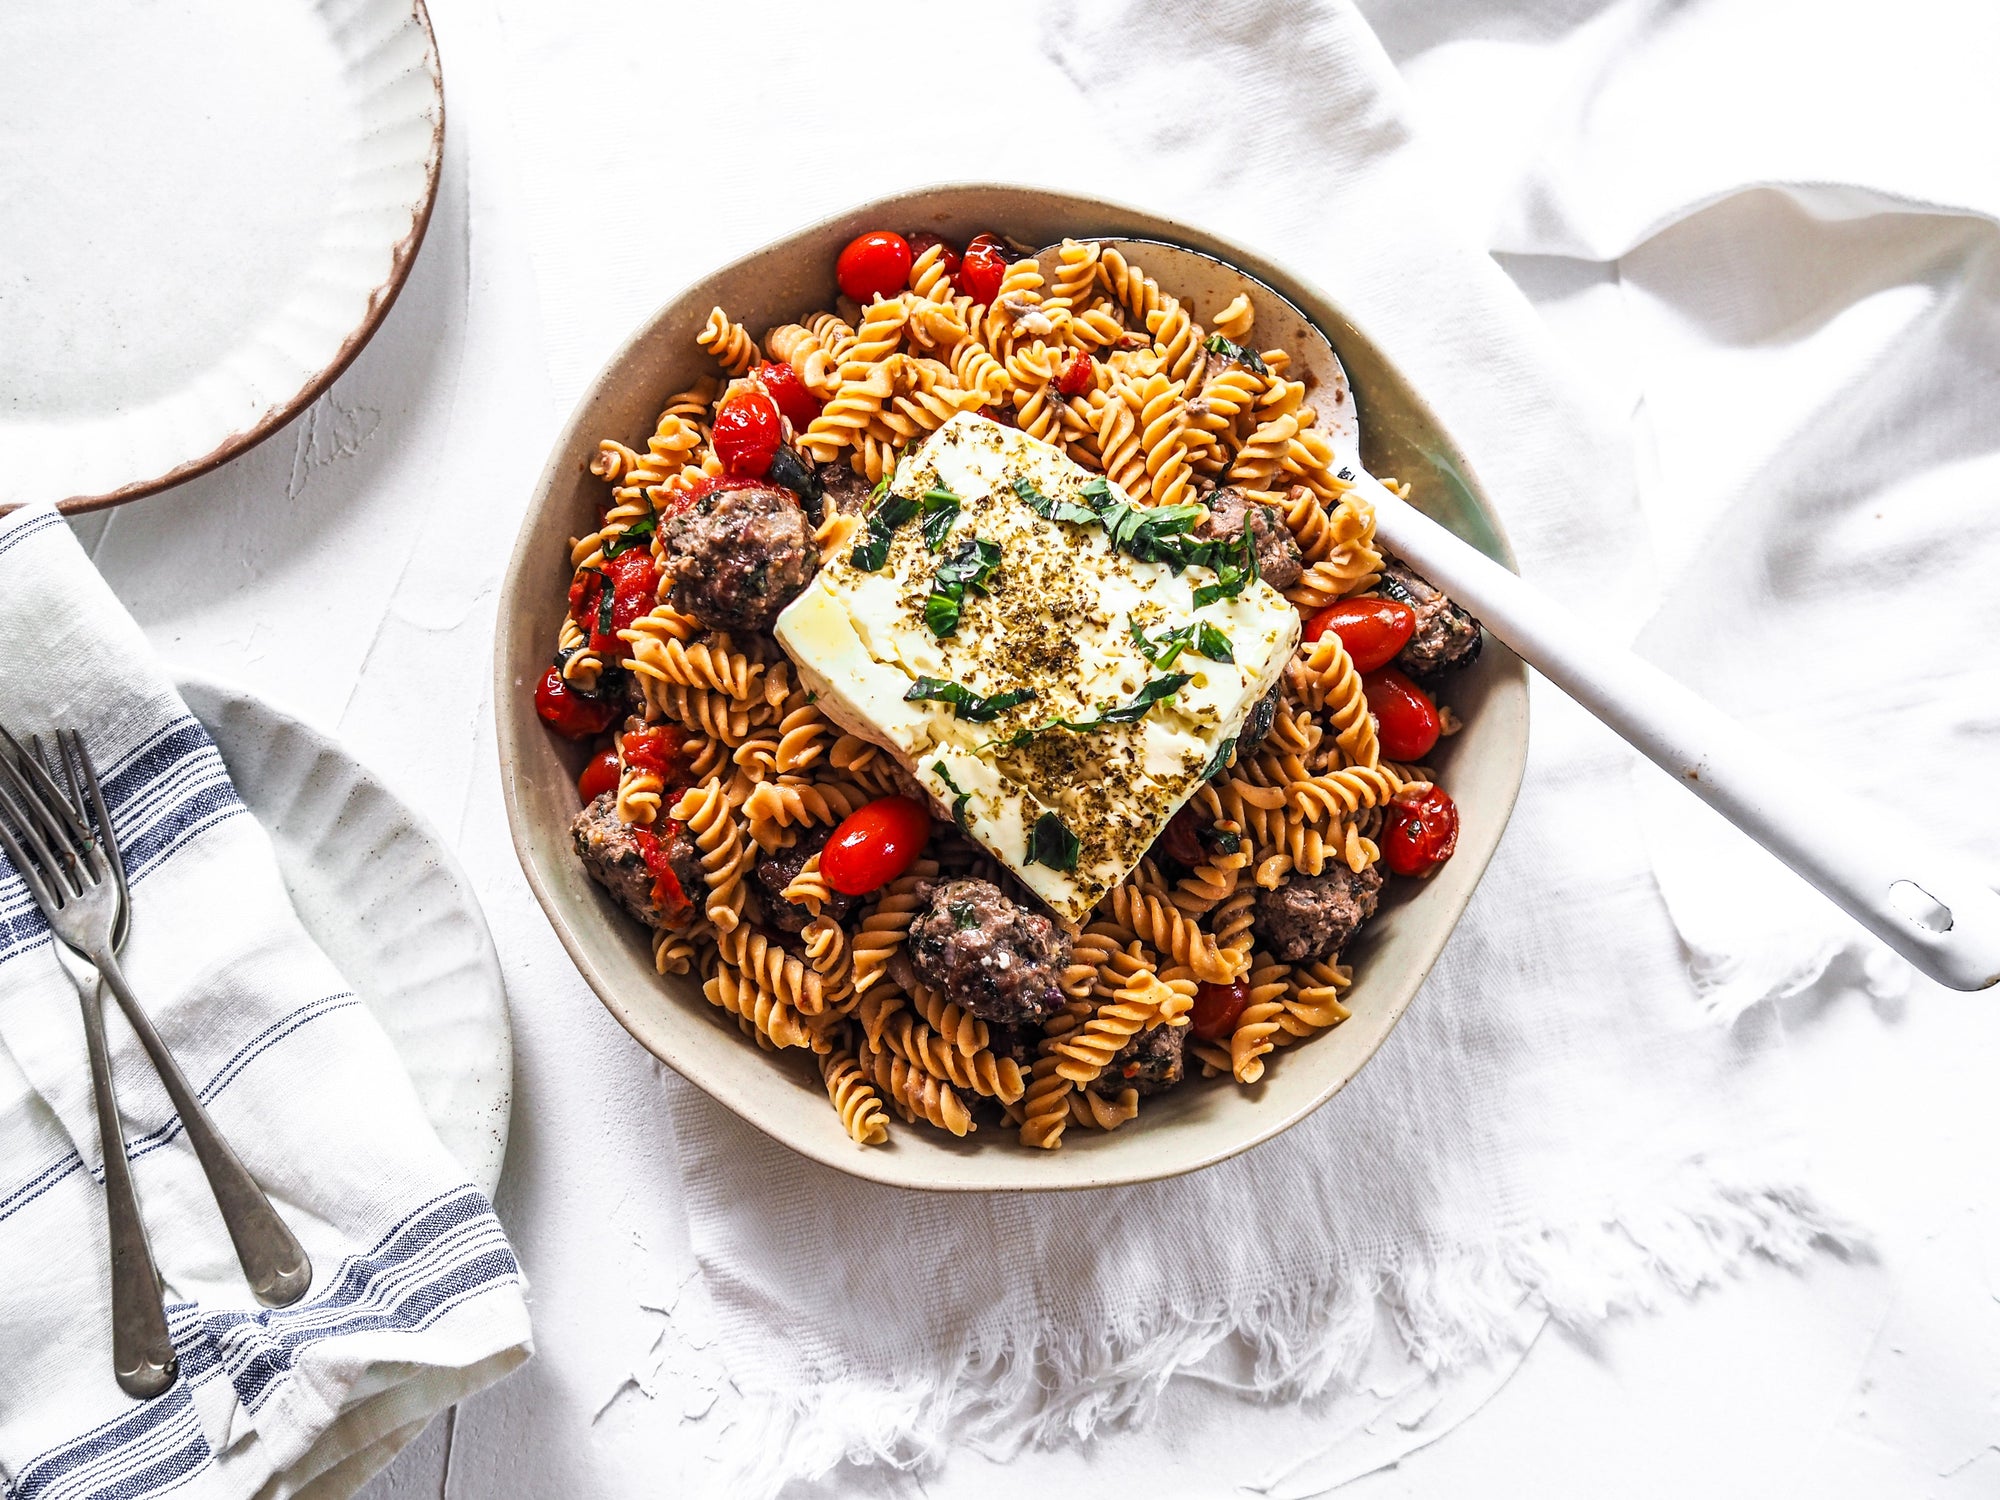 Baked Feta, Tomato and Basil Meatballs with Chickpea pasta